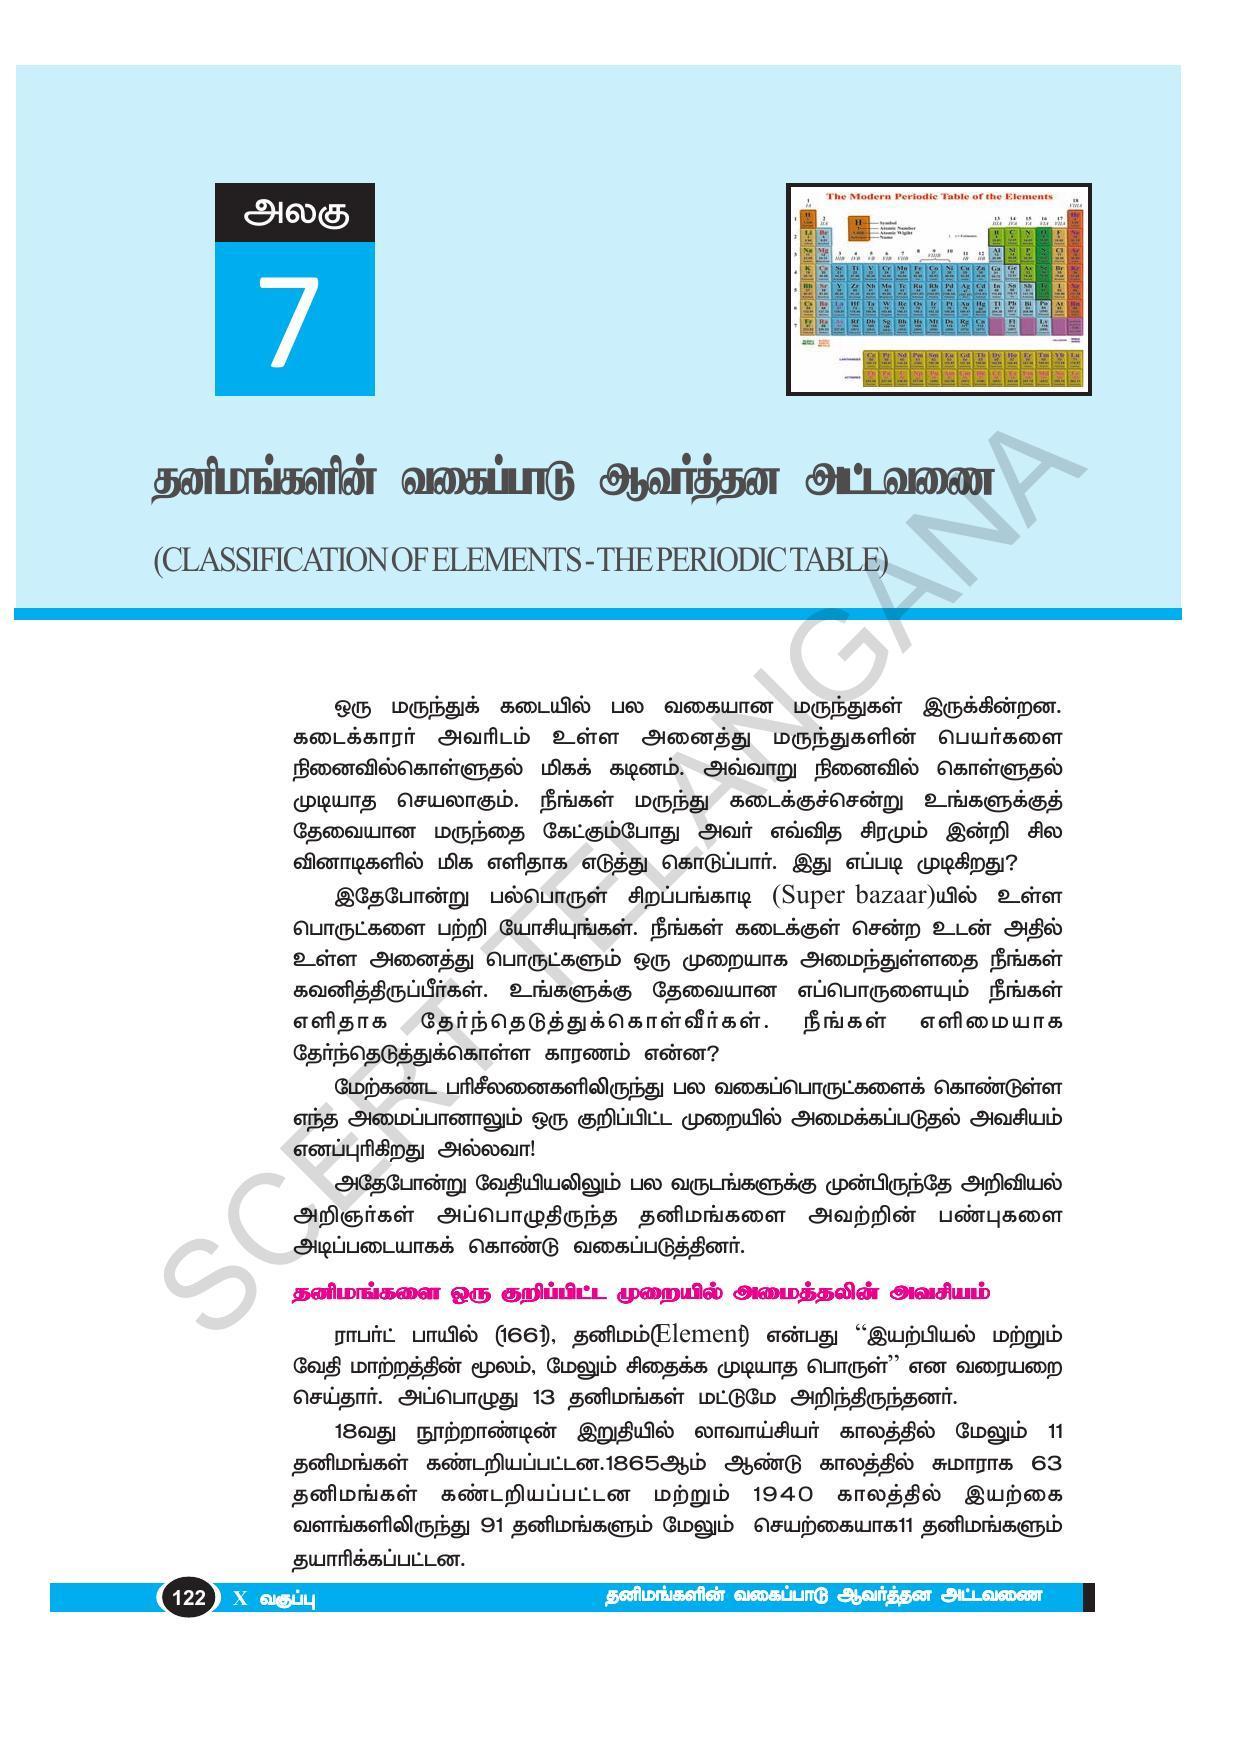 TS SCERT Class 10 Physical Science(Tamil Medium) Text Book - Page 134